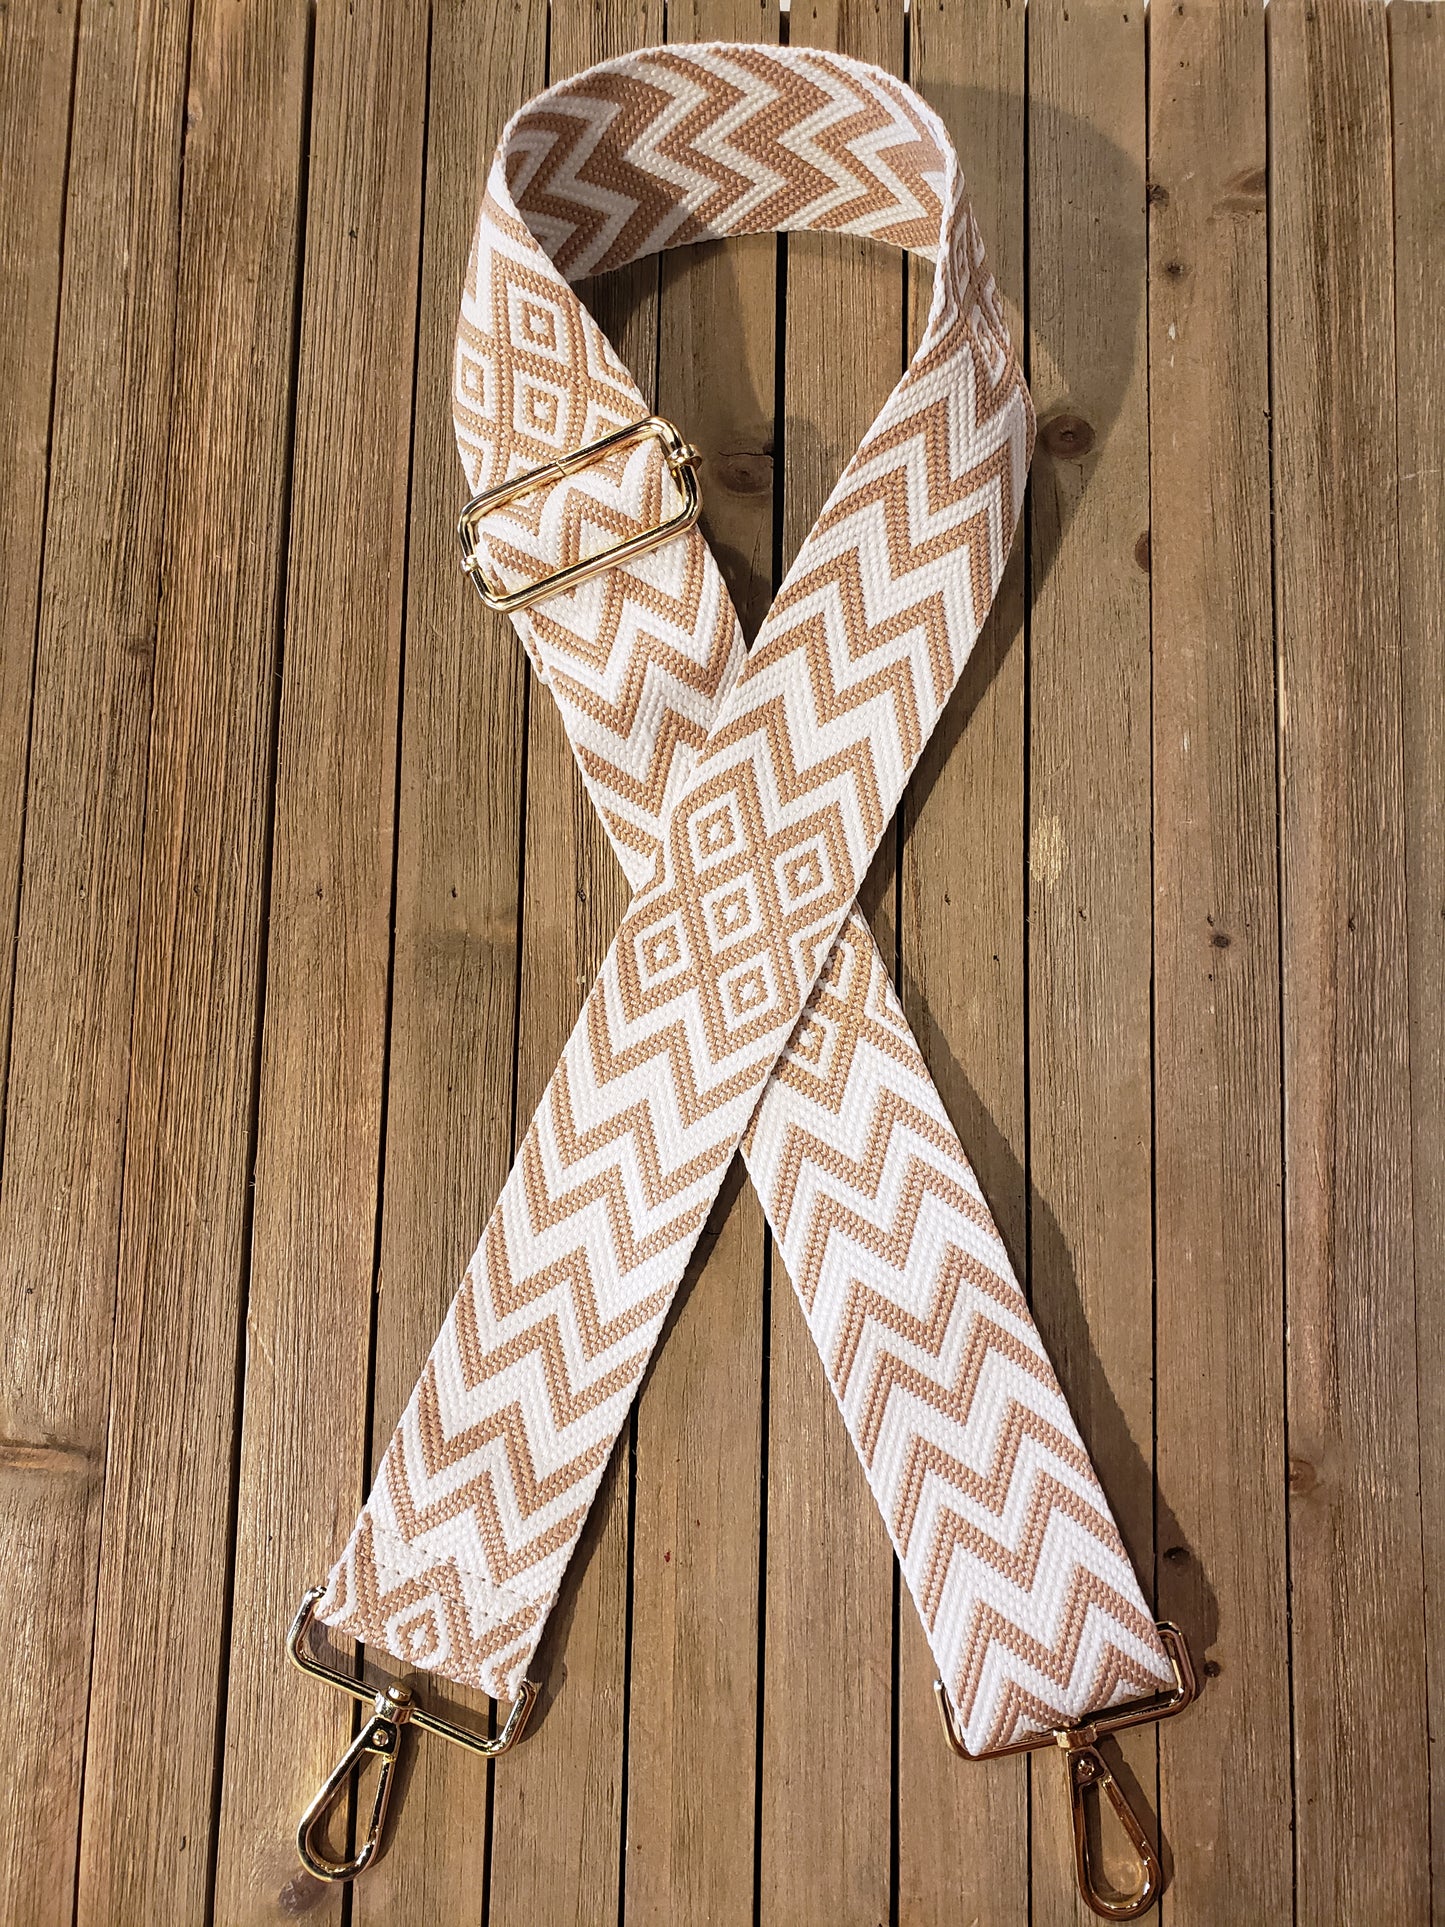 2" Adjustable Embroidered Bag Strap - Tan and White Chevron Stripes